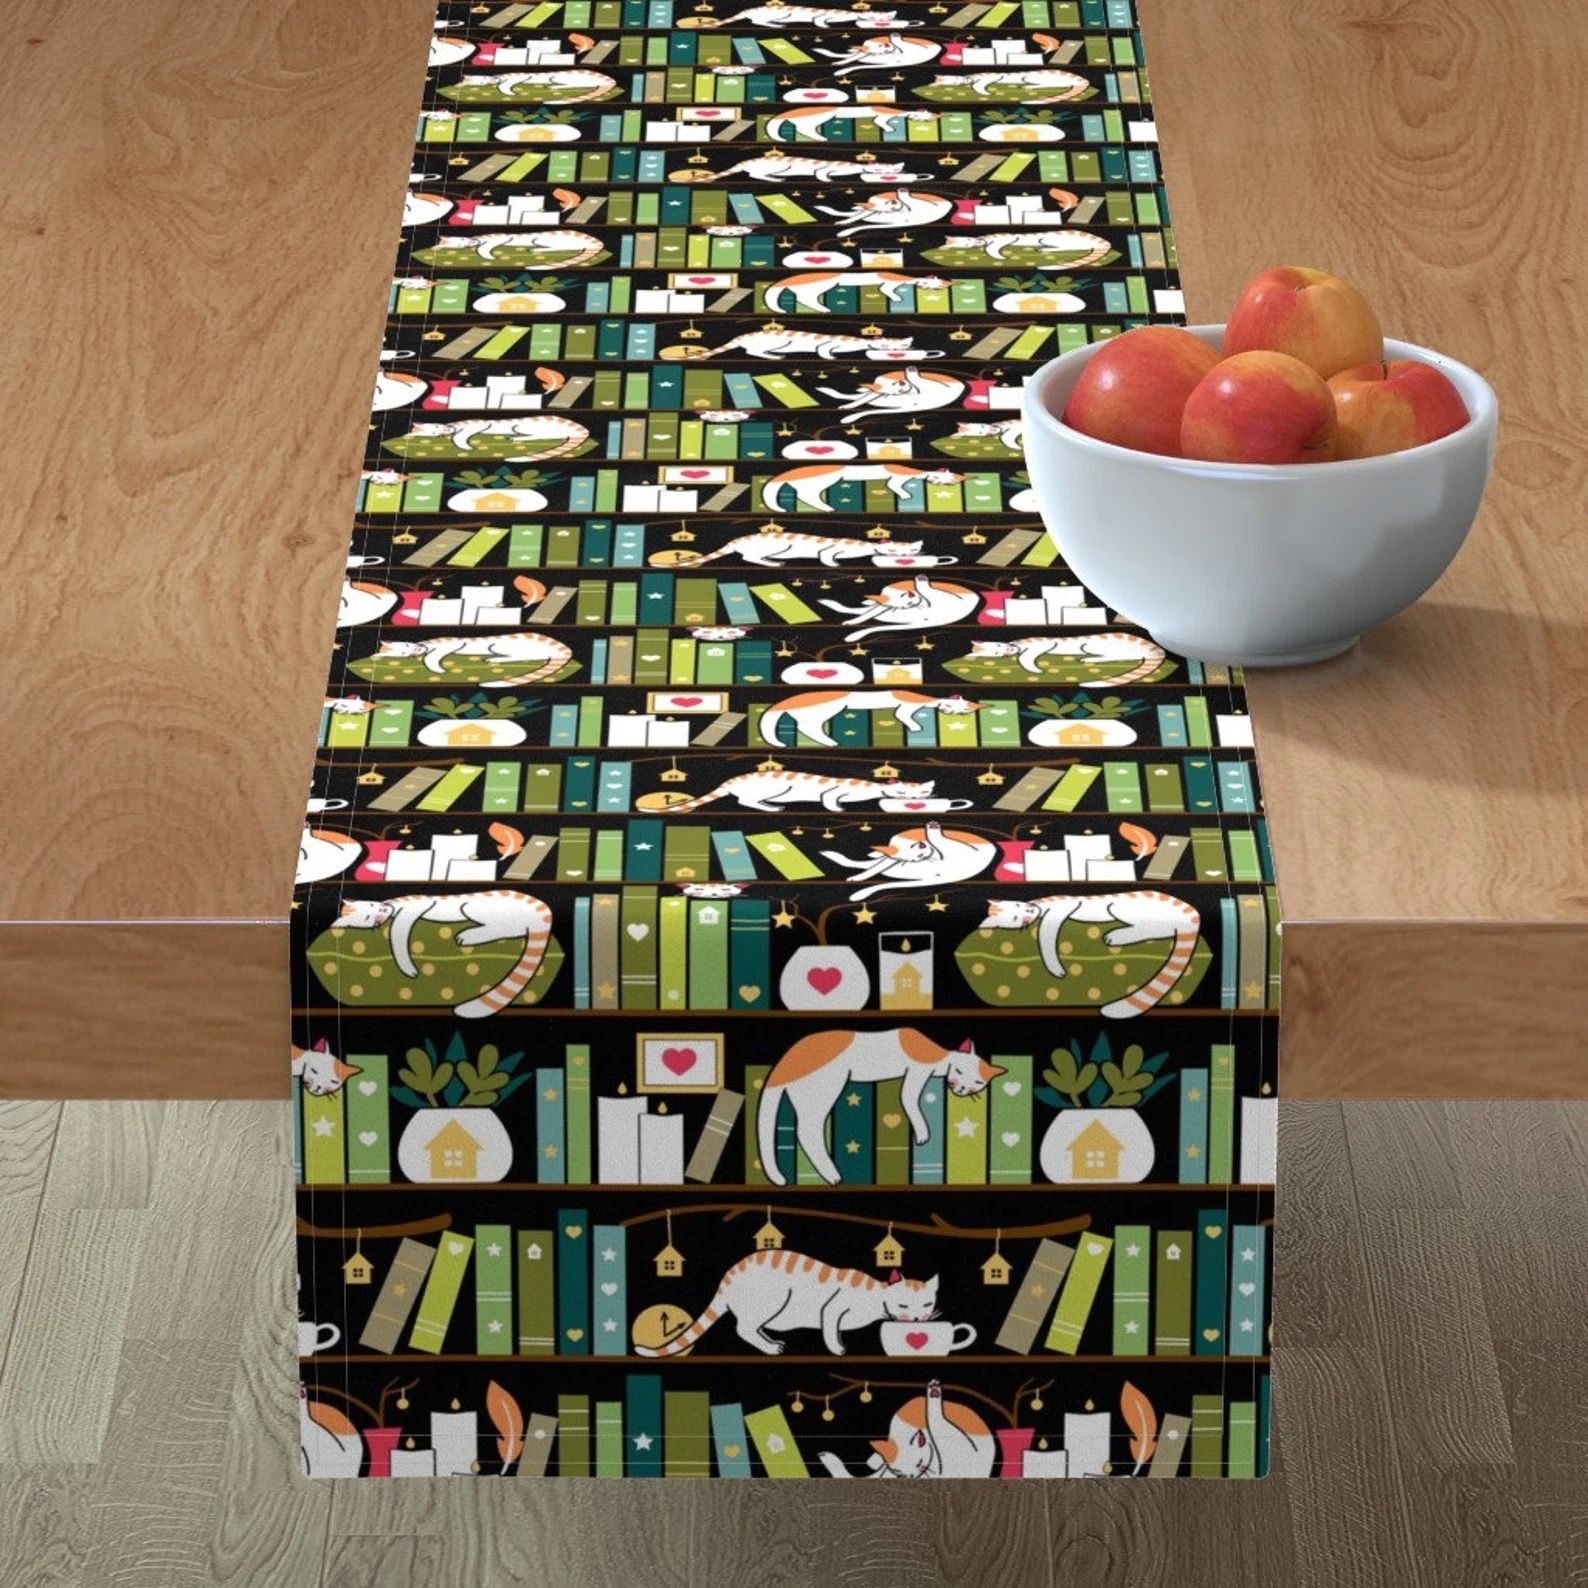 A cloth table runner with a pattern of books lounging among stacks of library books.